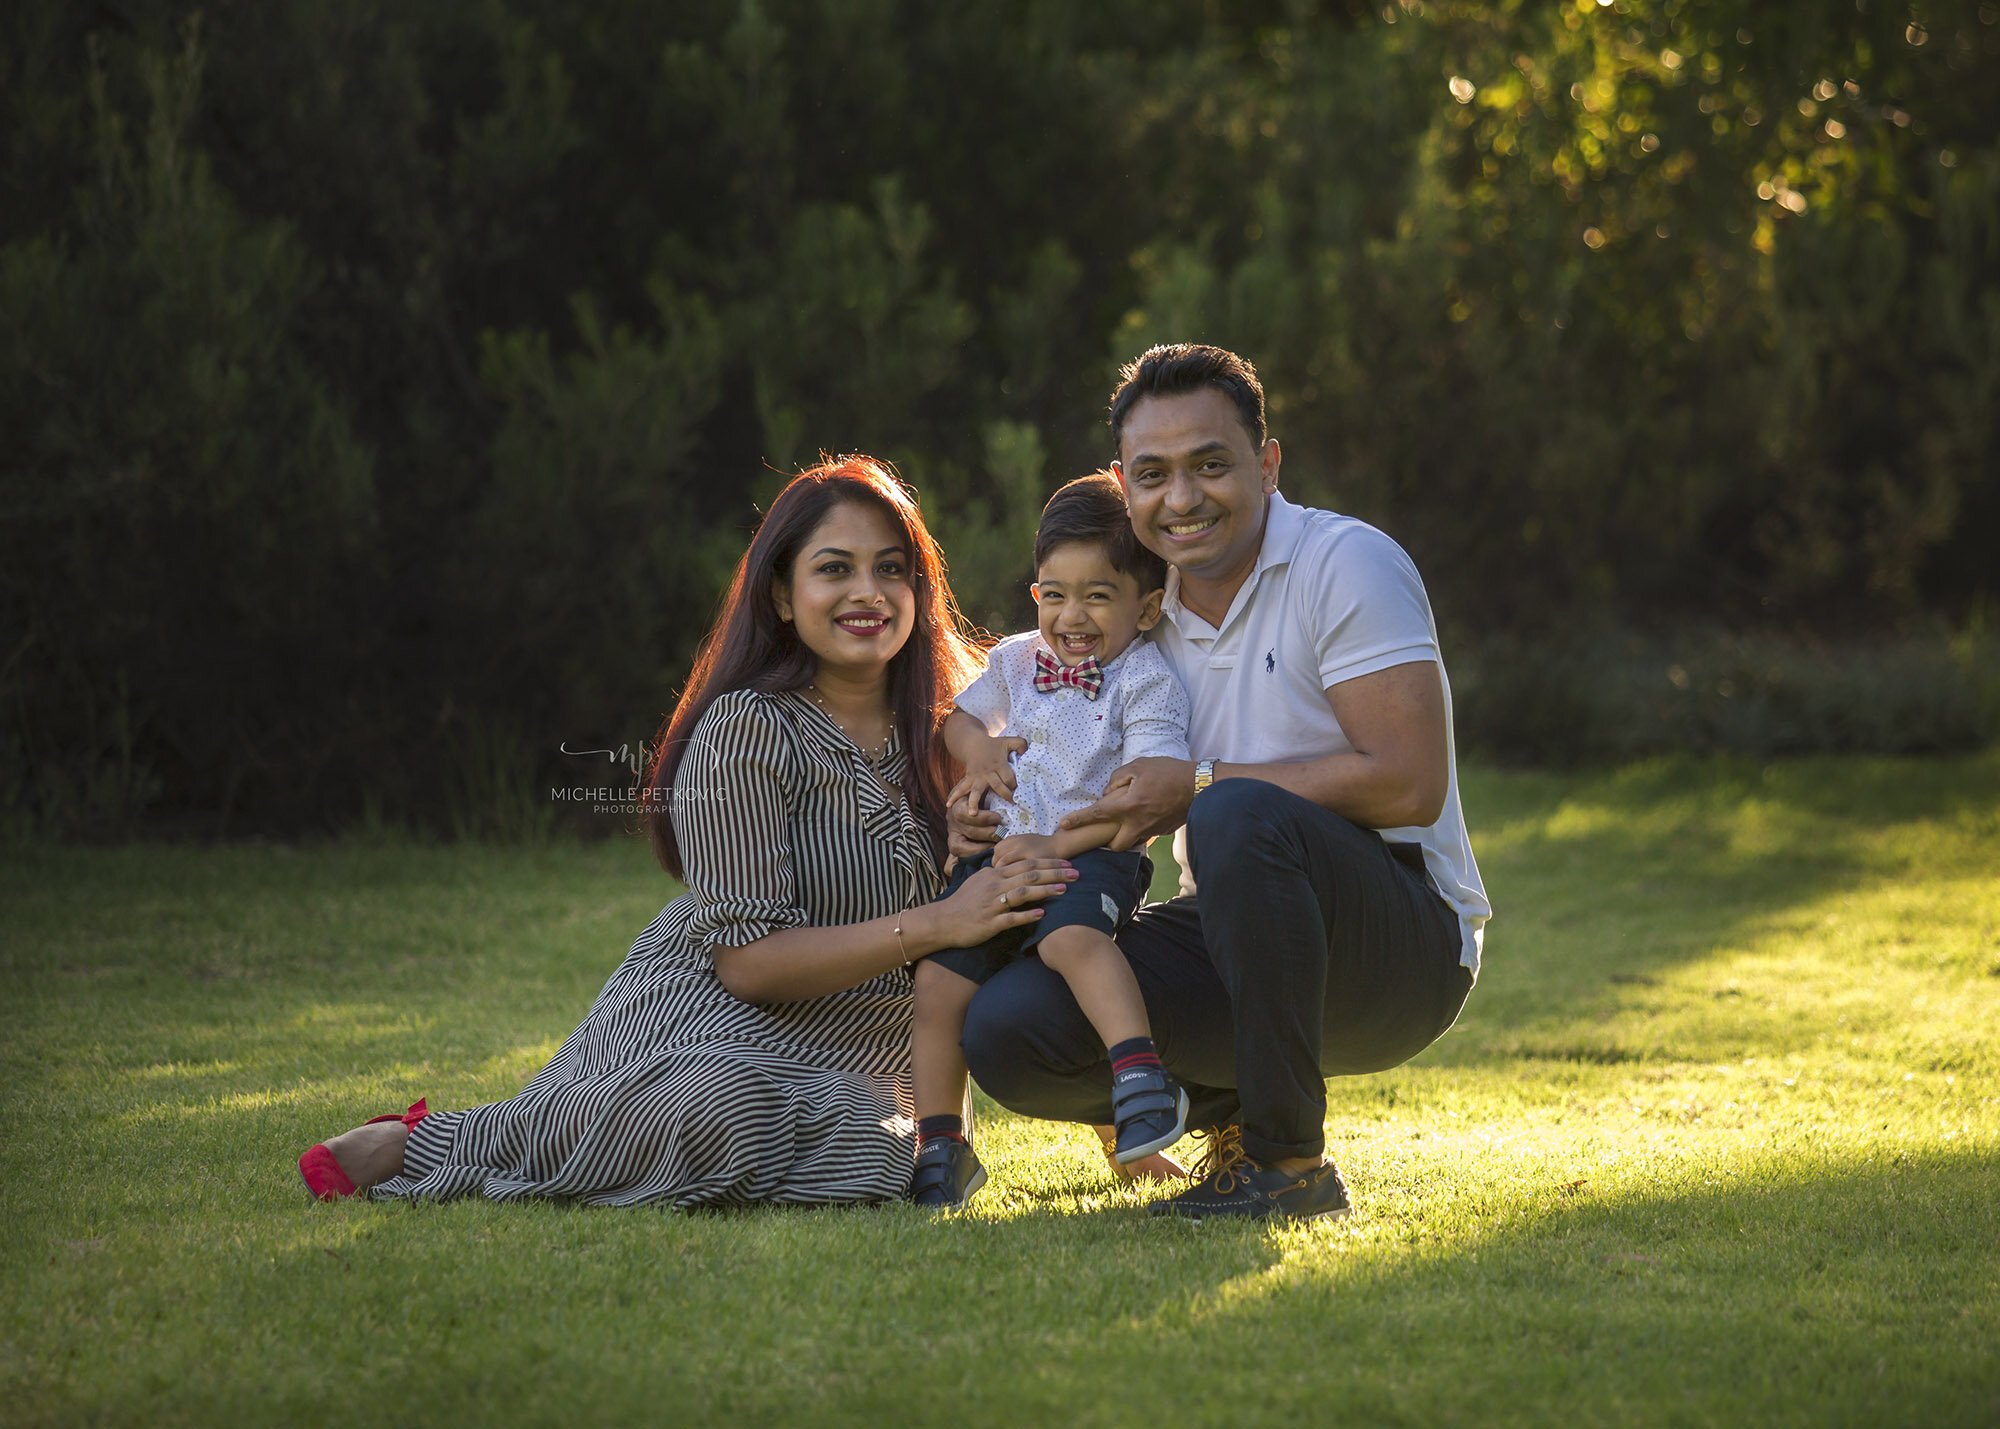 Adelaide-family-professional-photography-02.jpg